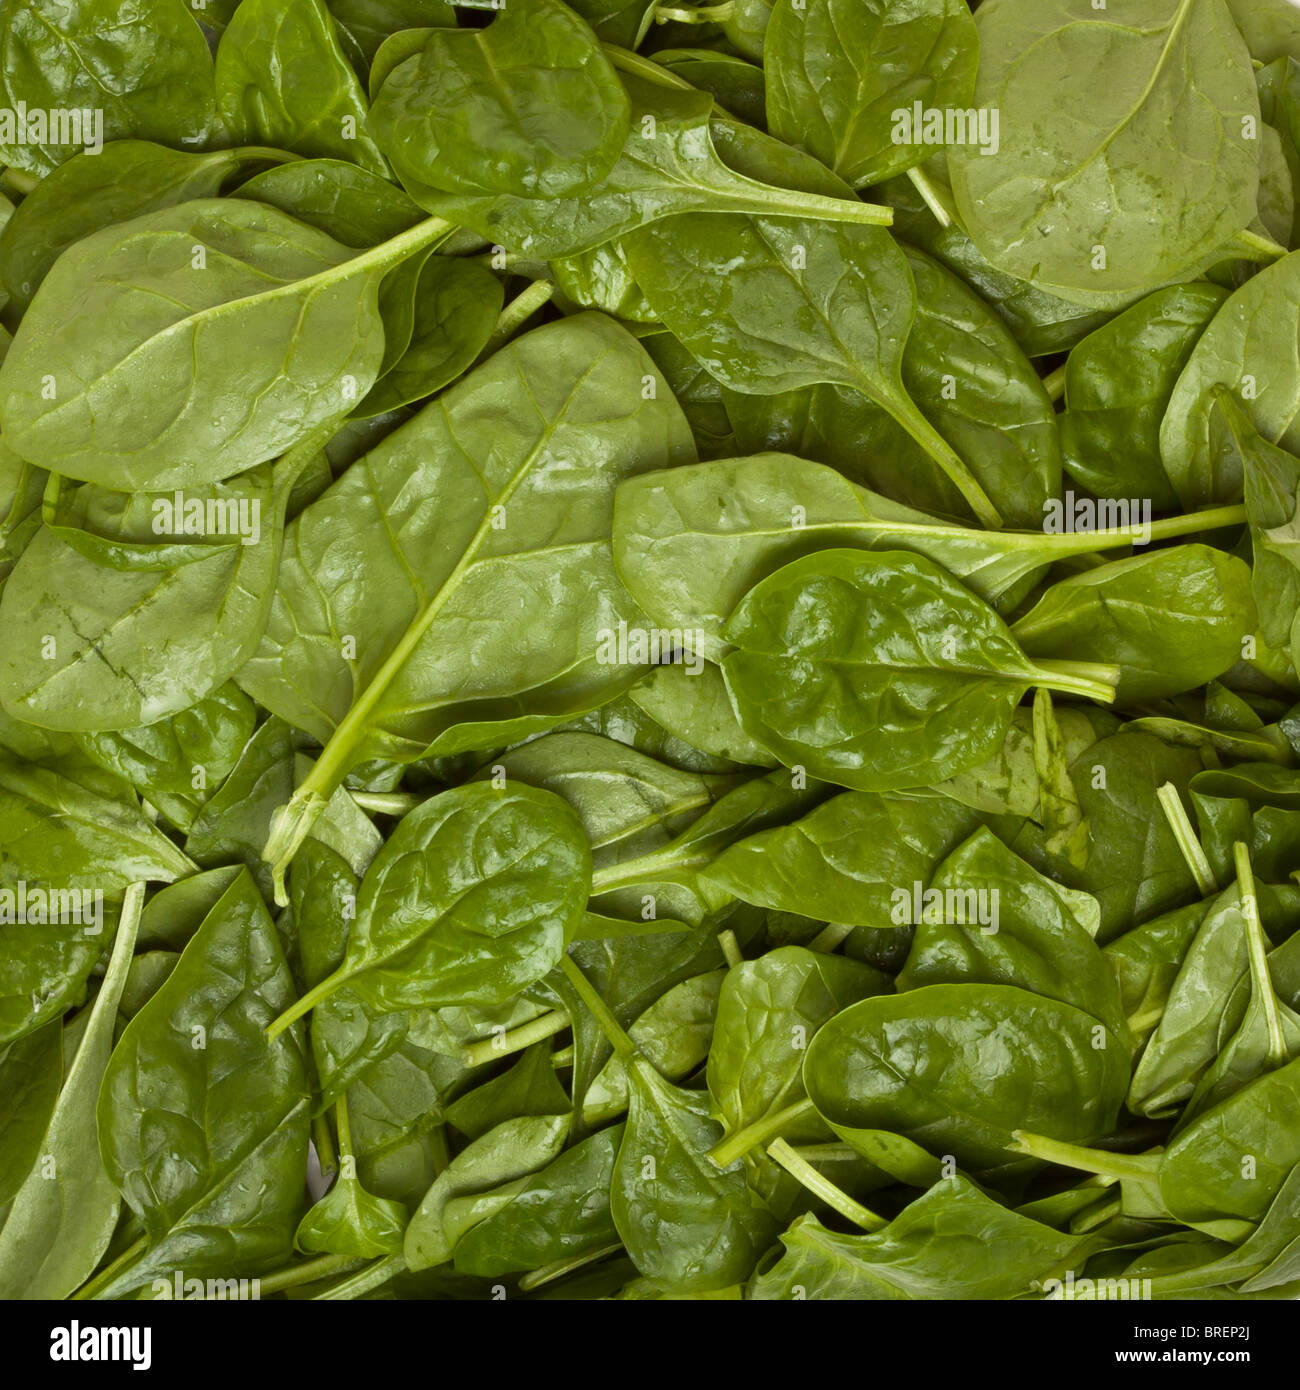 Background image of fresh vibrant succulent spinach. Stock Photo